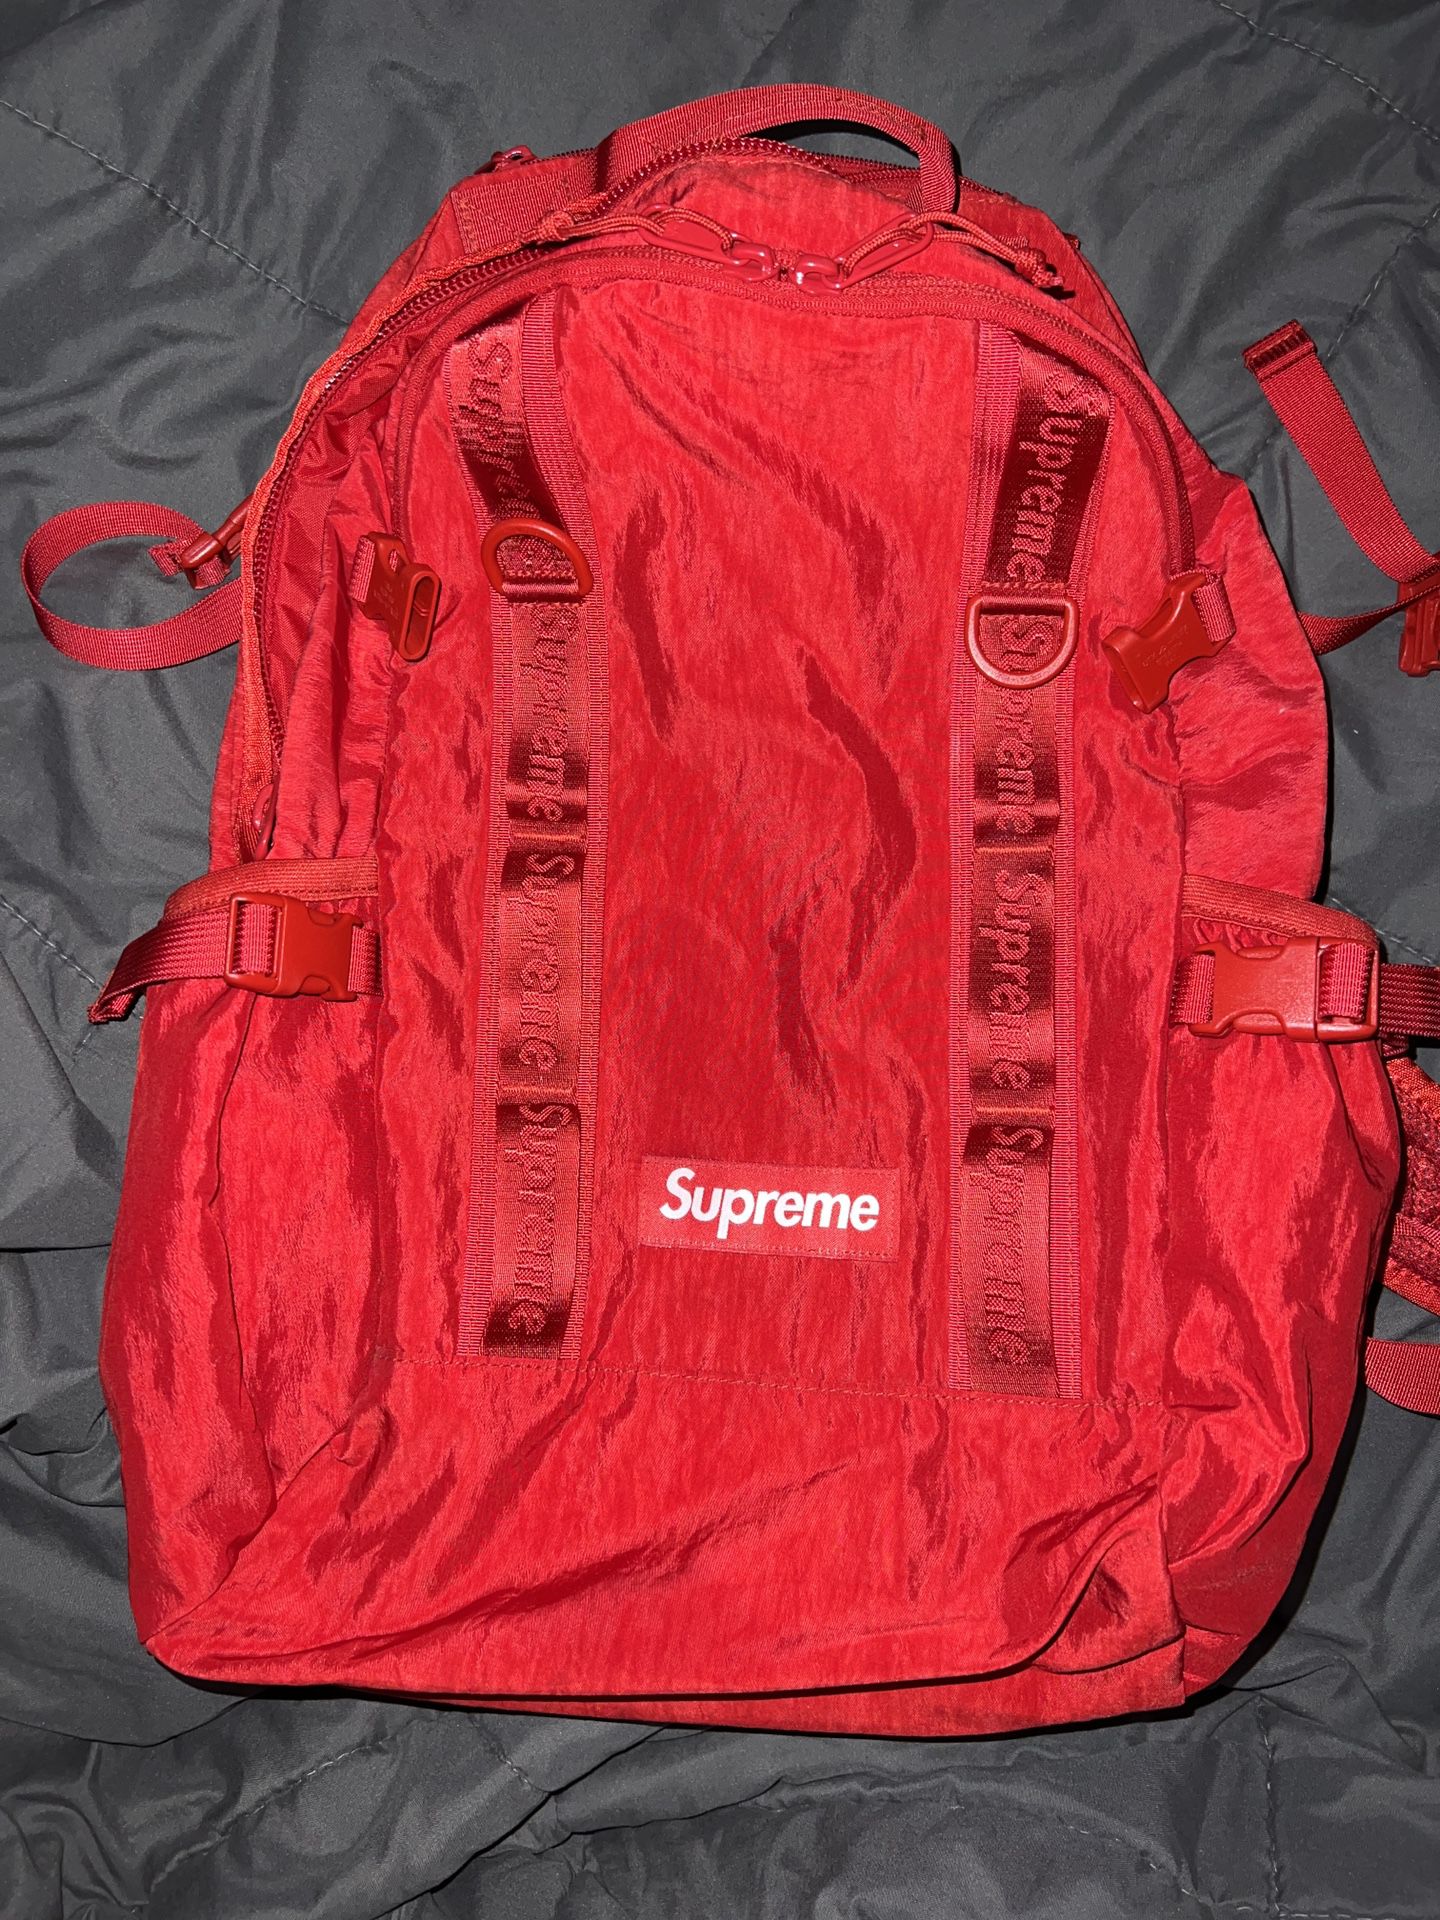 Supreme Backpack for Sale in City Of Industry, CA - OfferUp